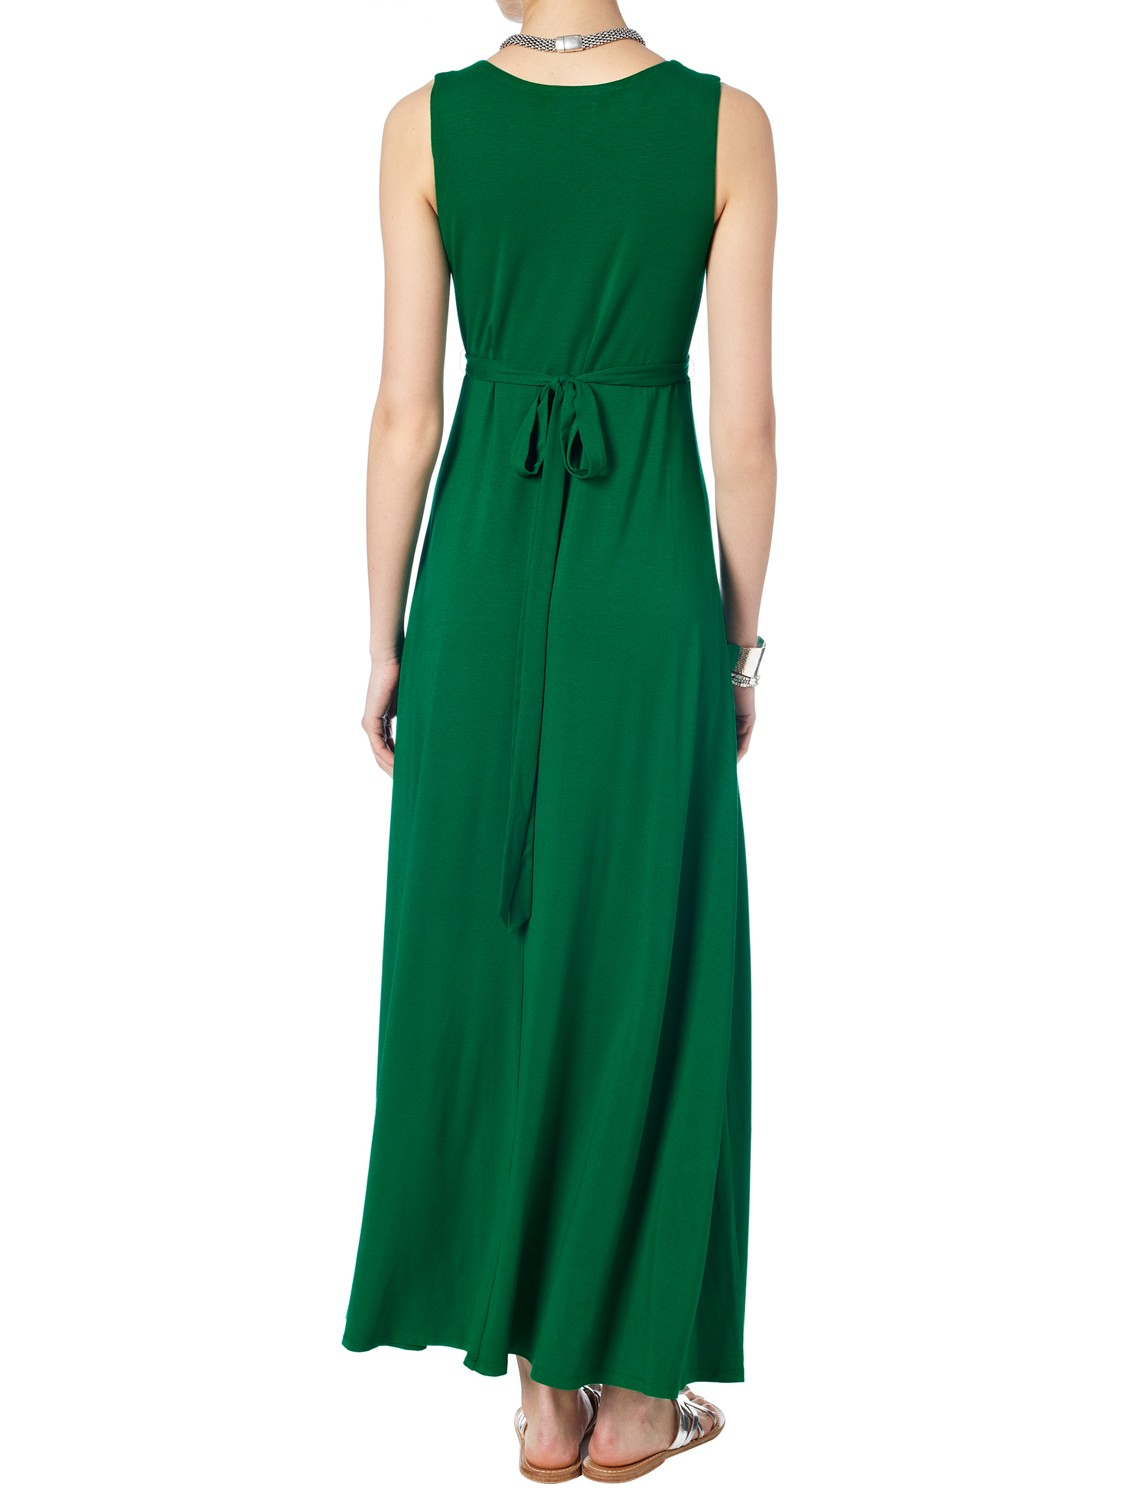 Phase Eight Abby Maxi Dress in Green - Lyst